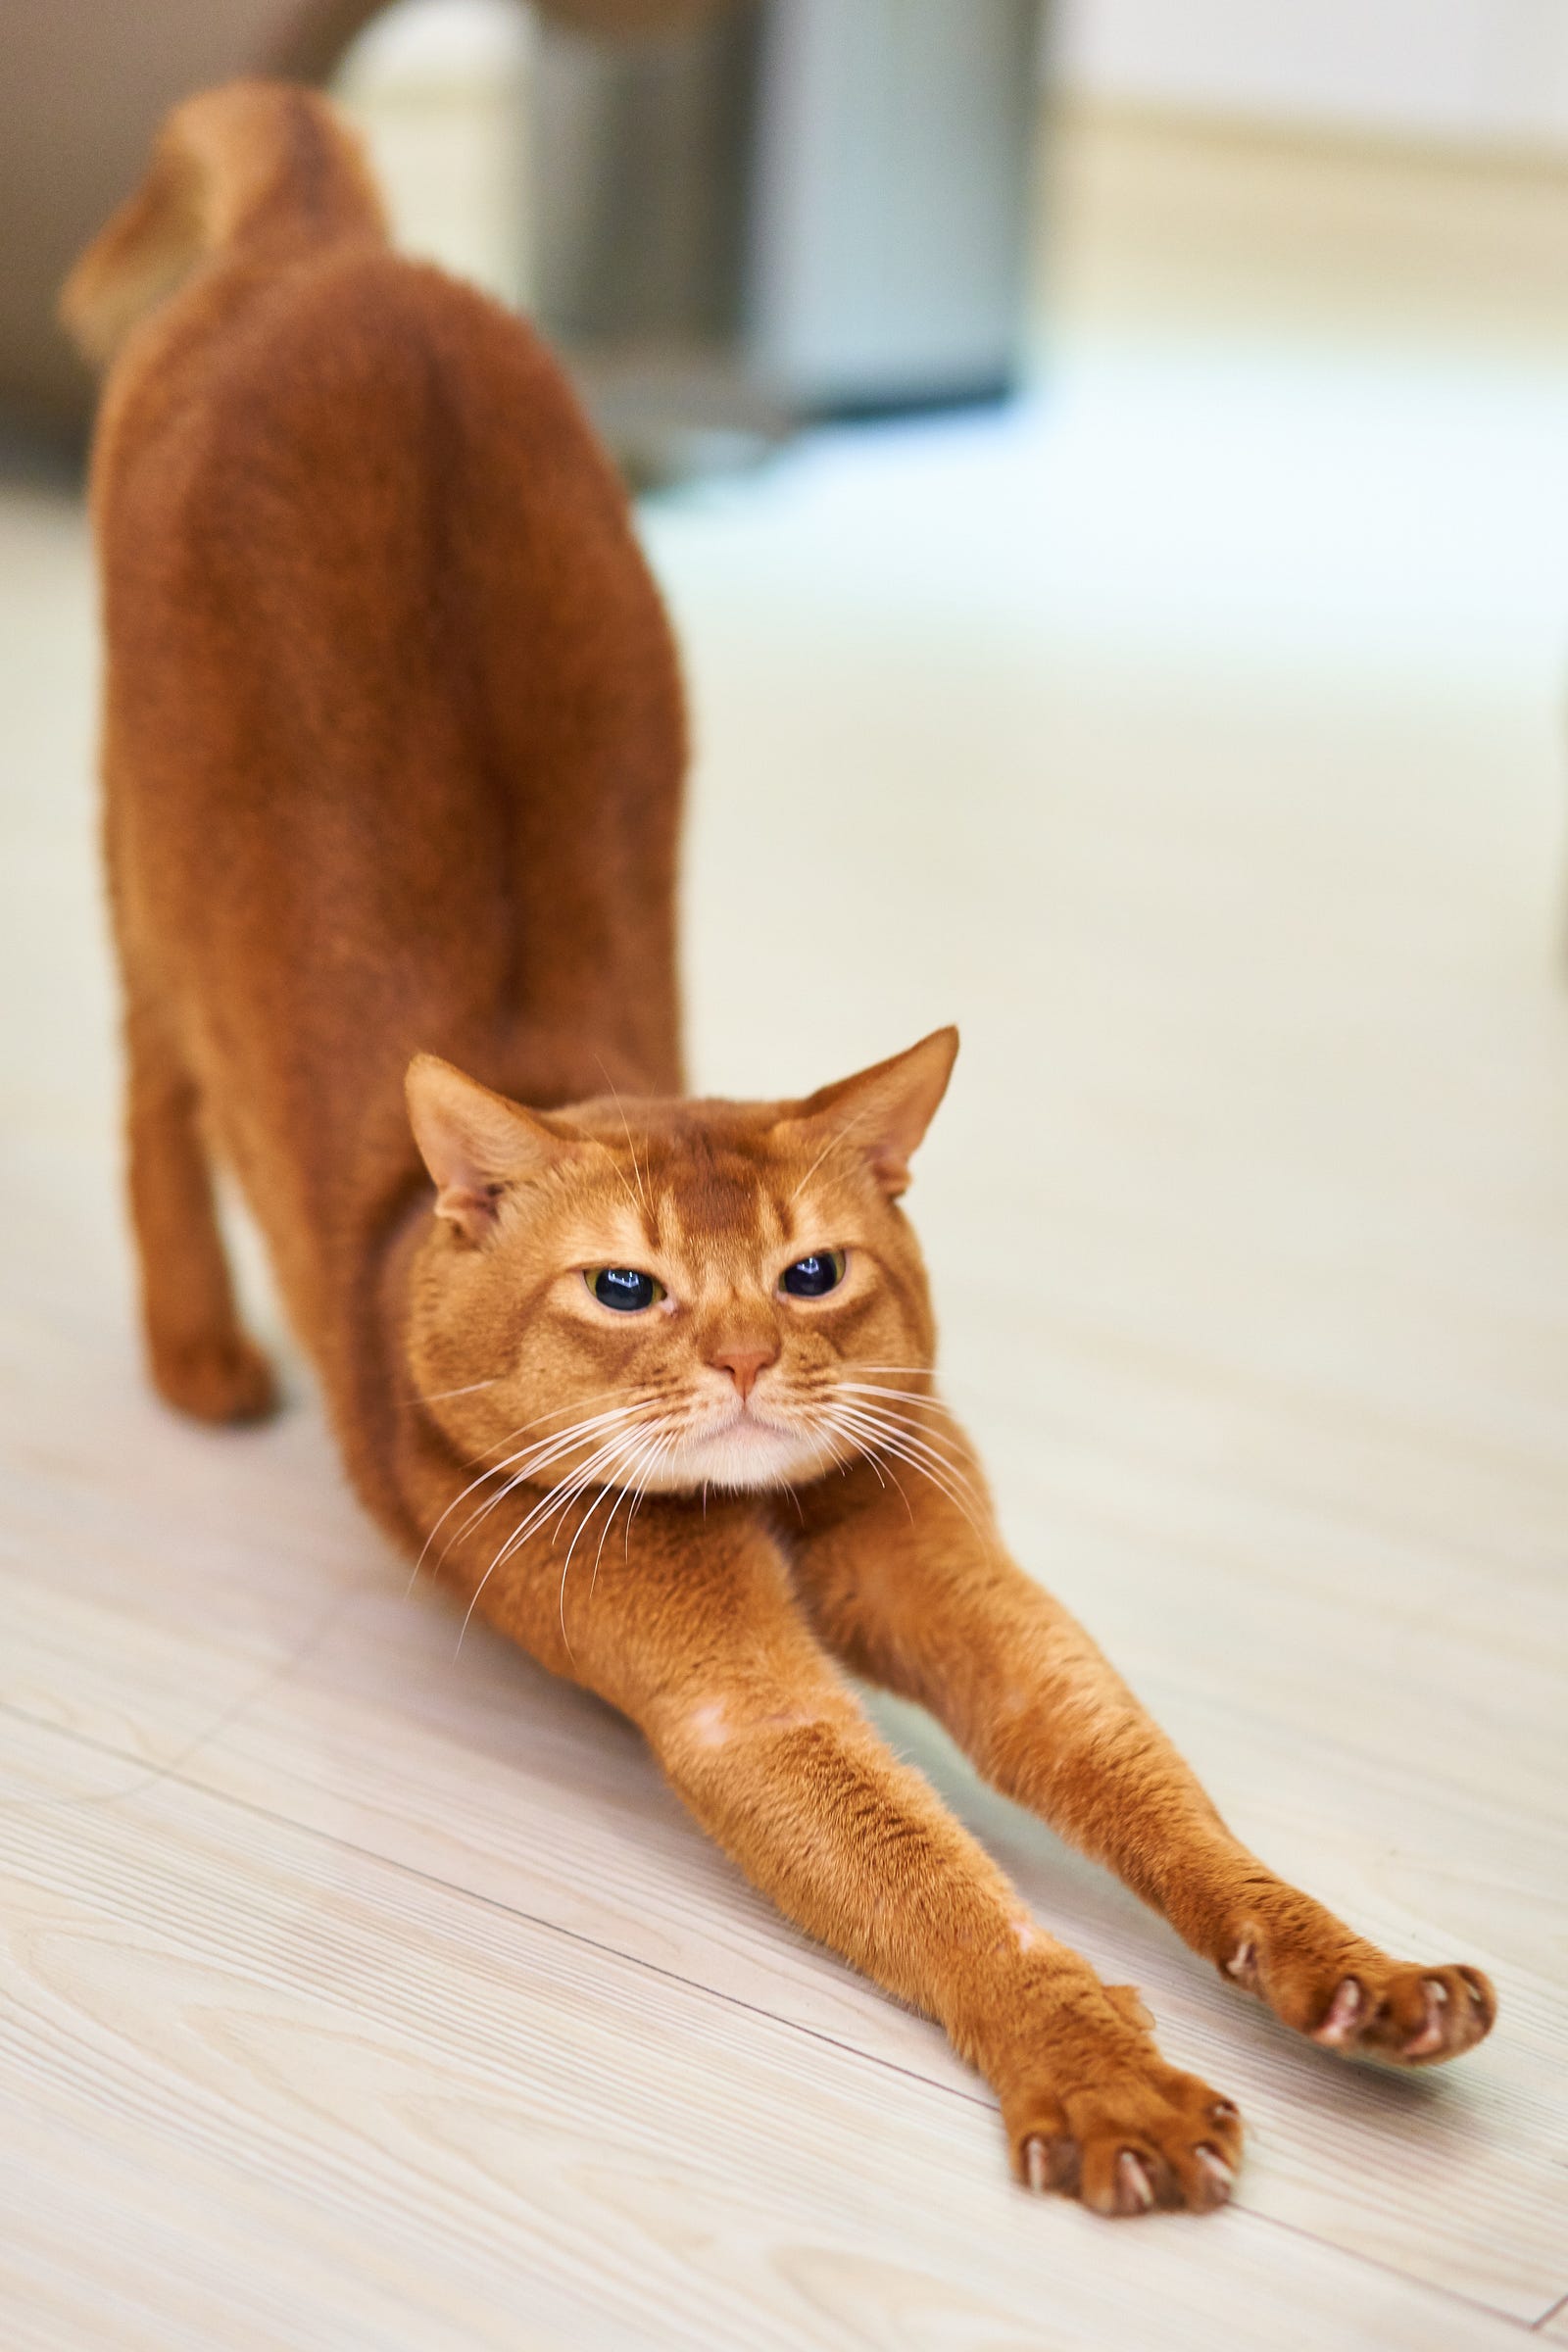 An orange cat, butt high in the air and head and front legs low, stretches. Static stretches before exercise can be detrimental to performance, while dynamic stretching may have value.